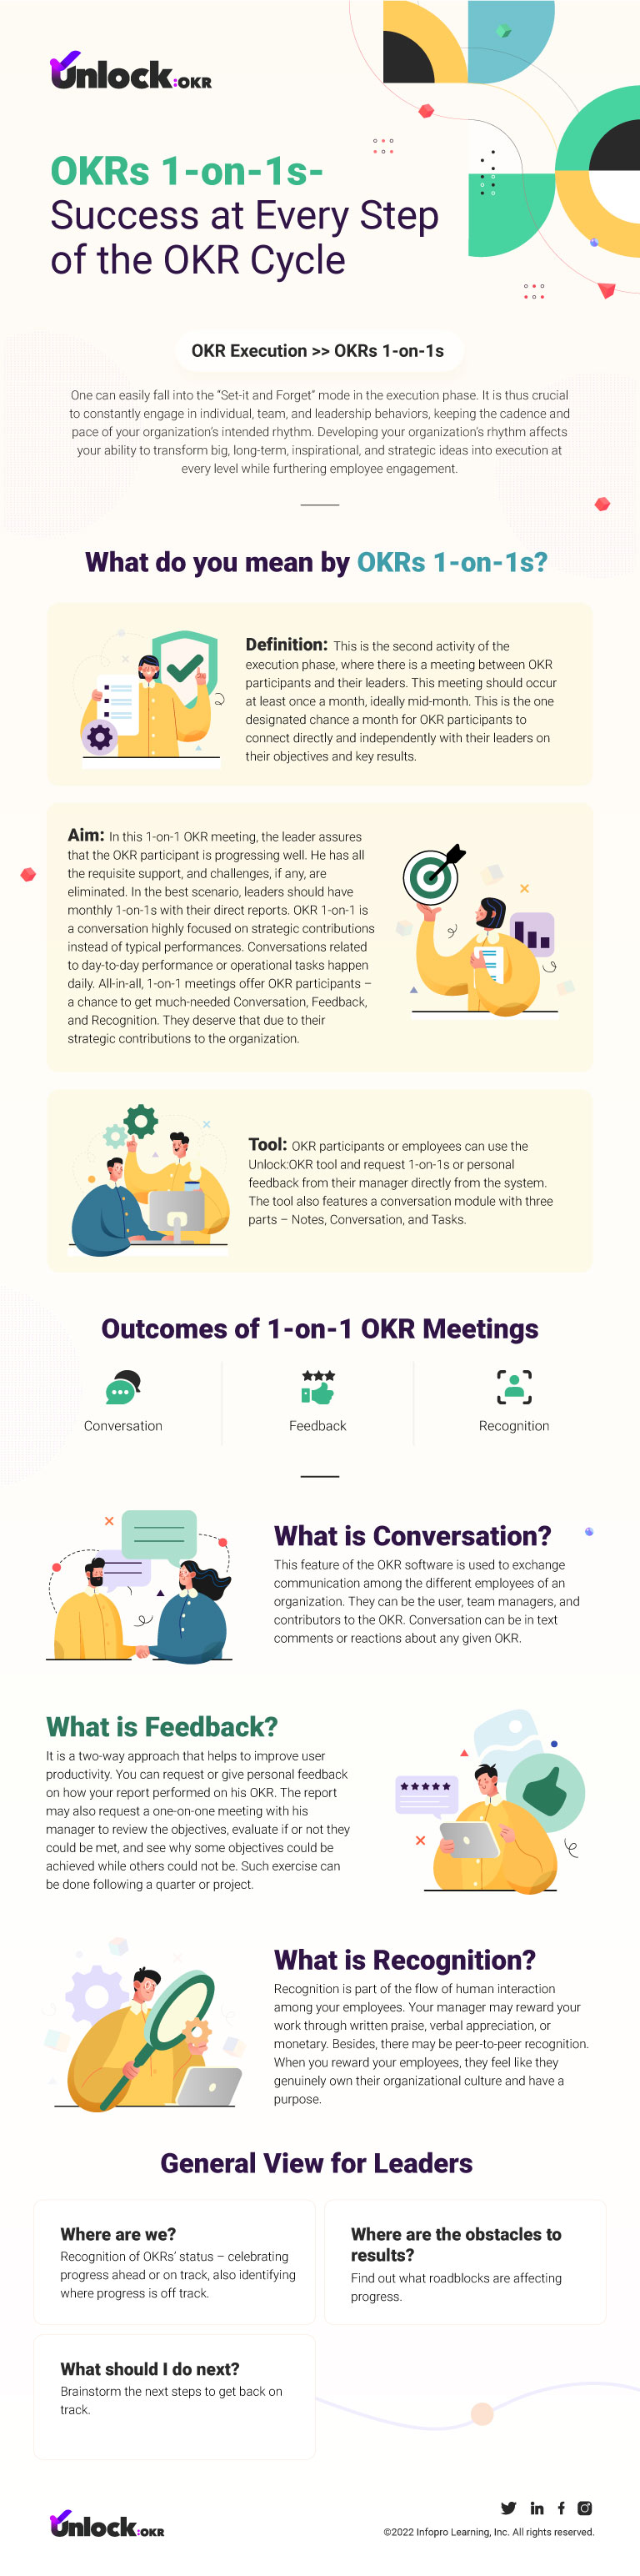 OKRs-1-on-1s-–-Success-at-Every-Step-of-the-OKR-Cycle